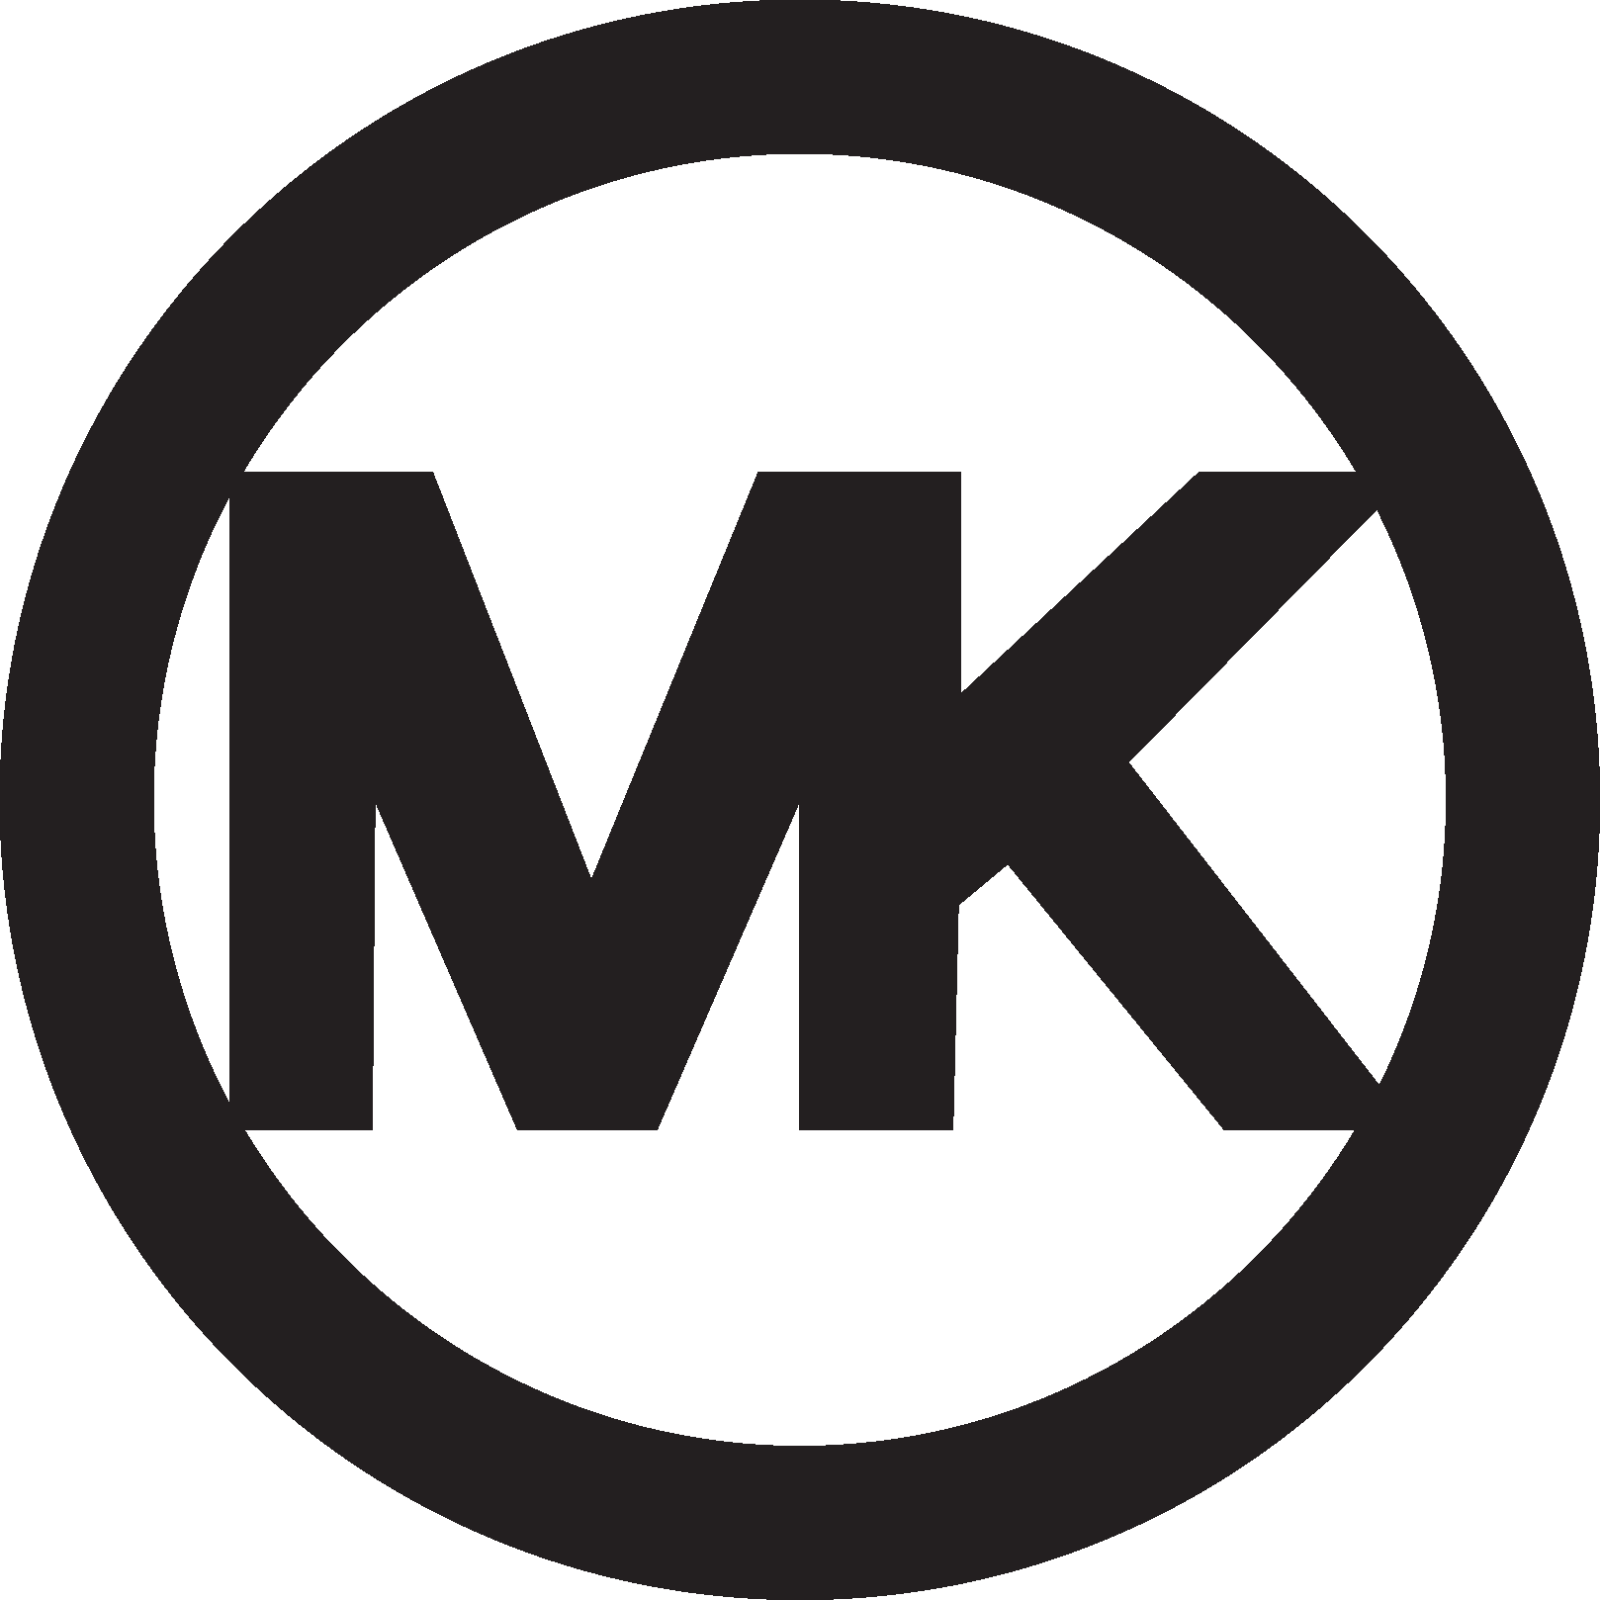 Michael Kors Logo and symbol, meaning, history, PNG, brand